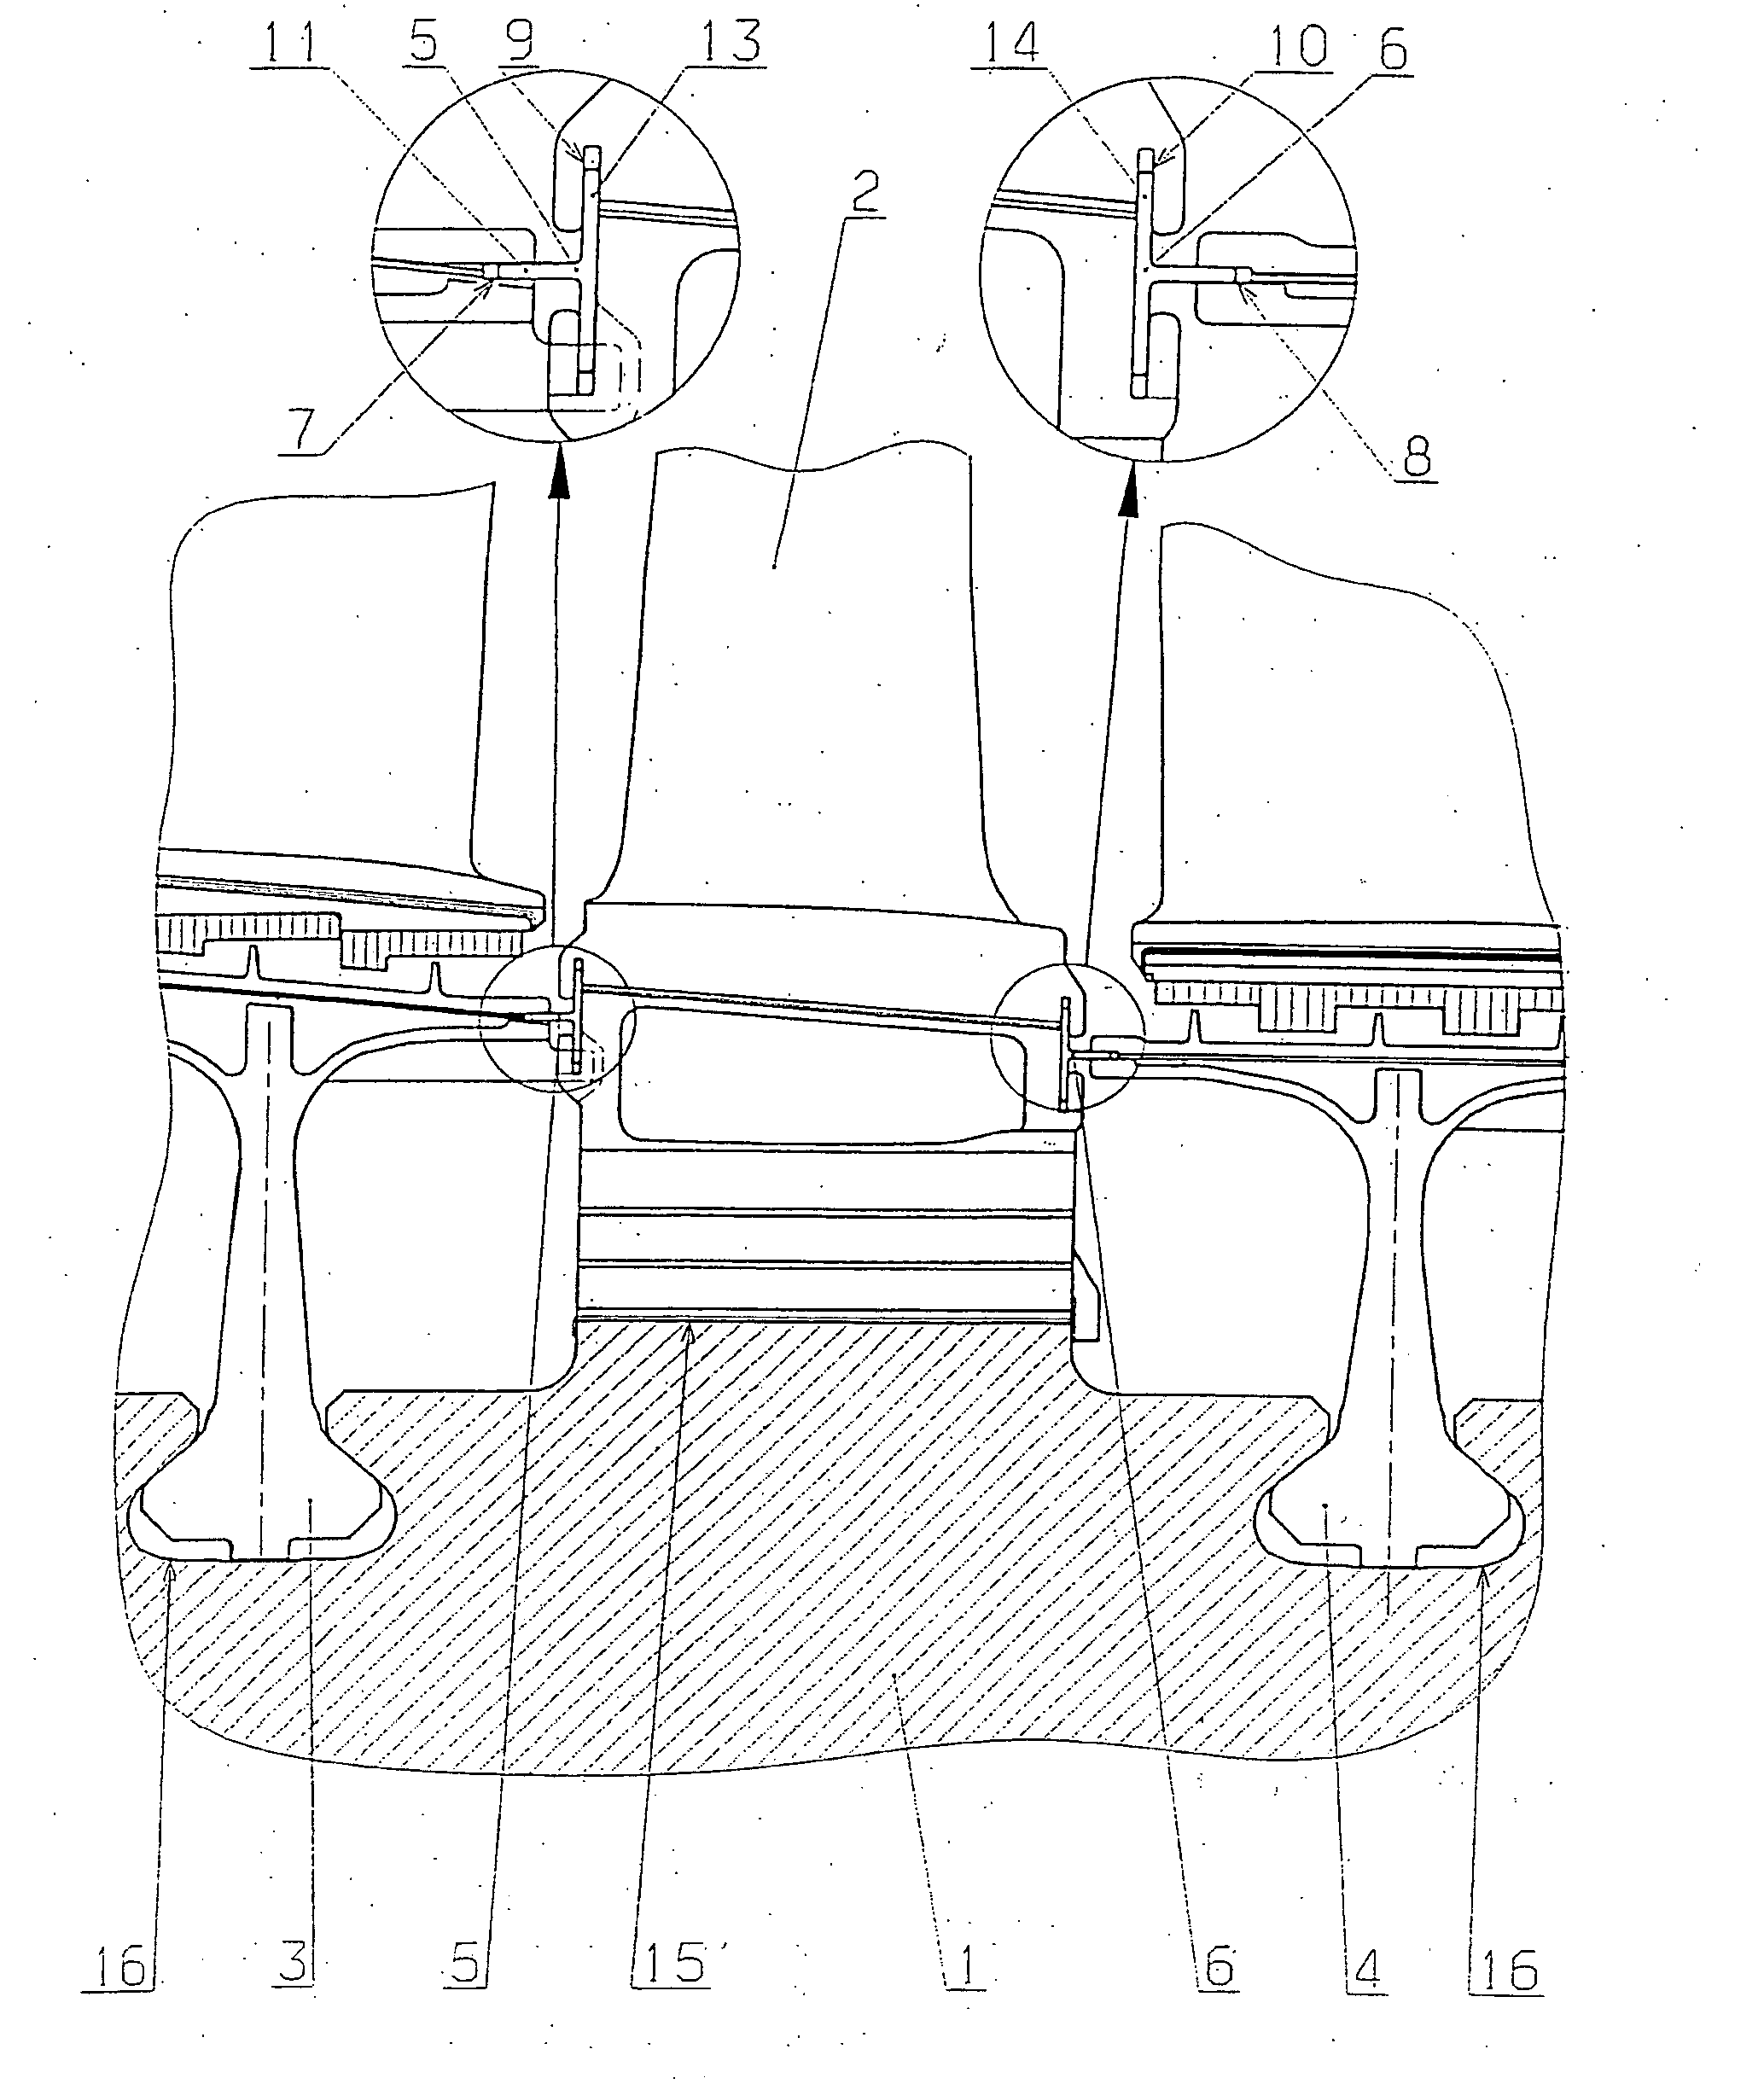 Sealing arrangement for a rotor of a turbo machine